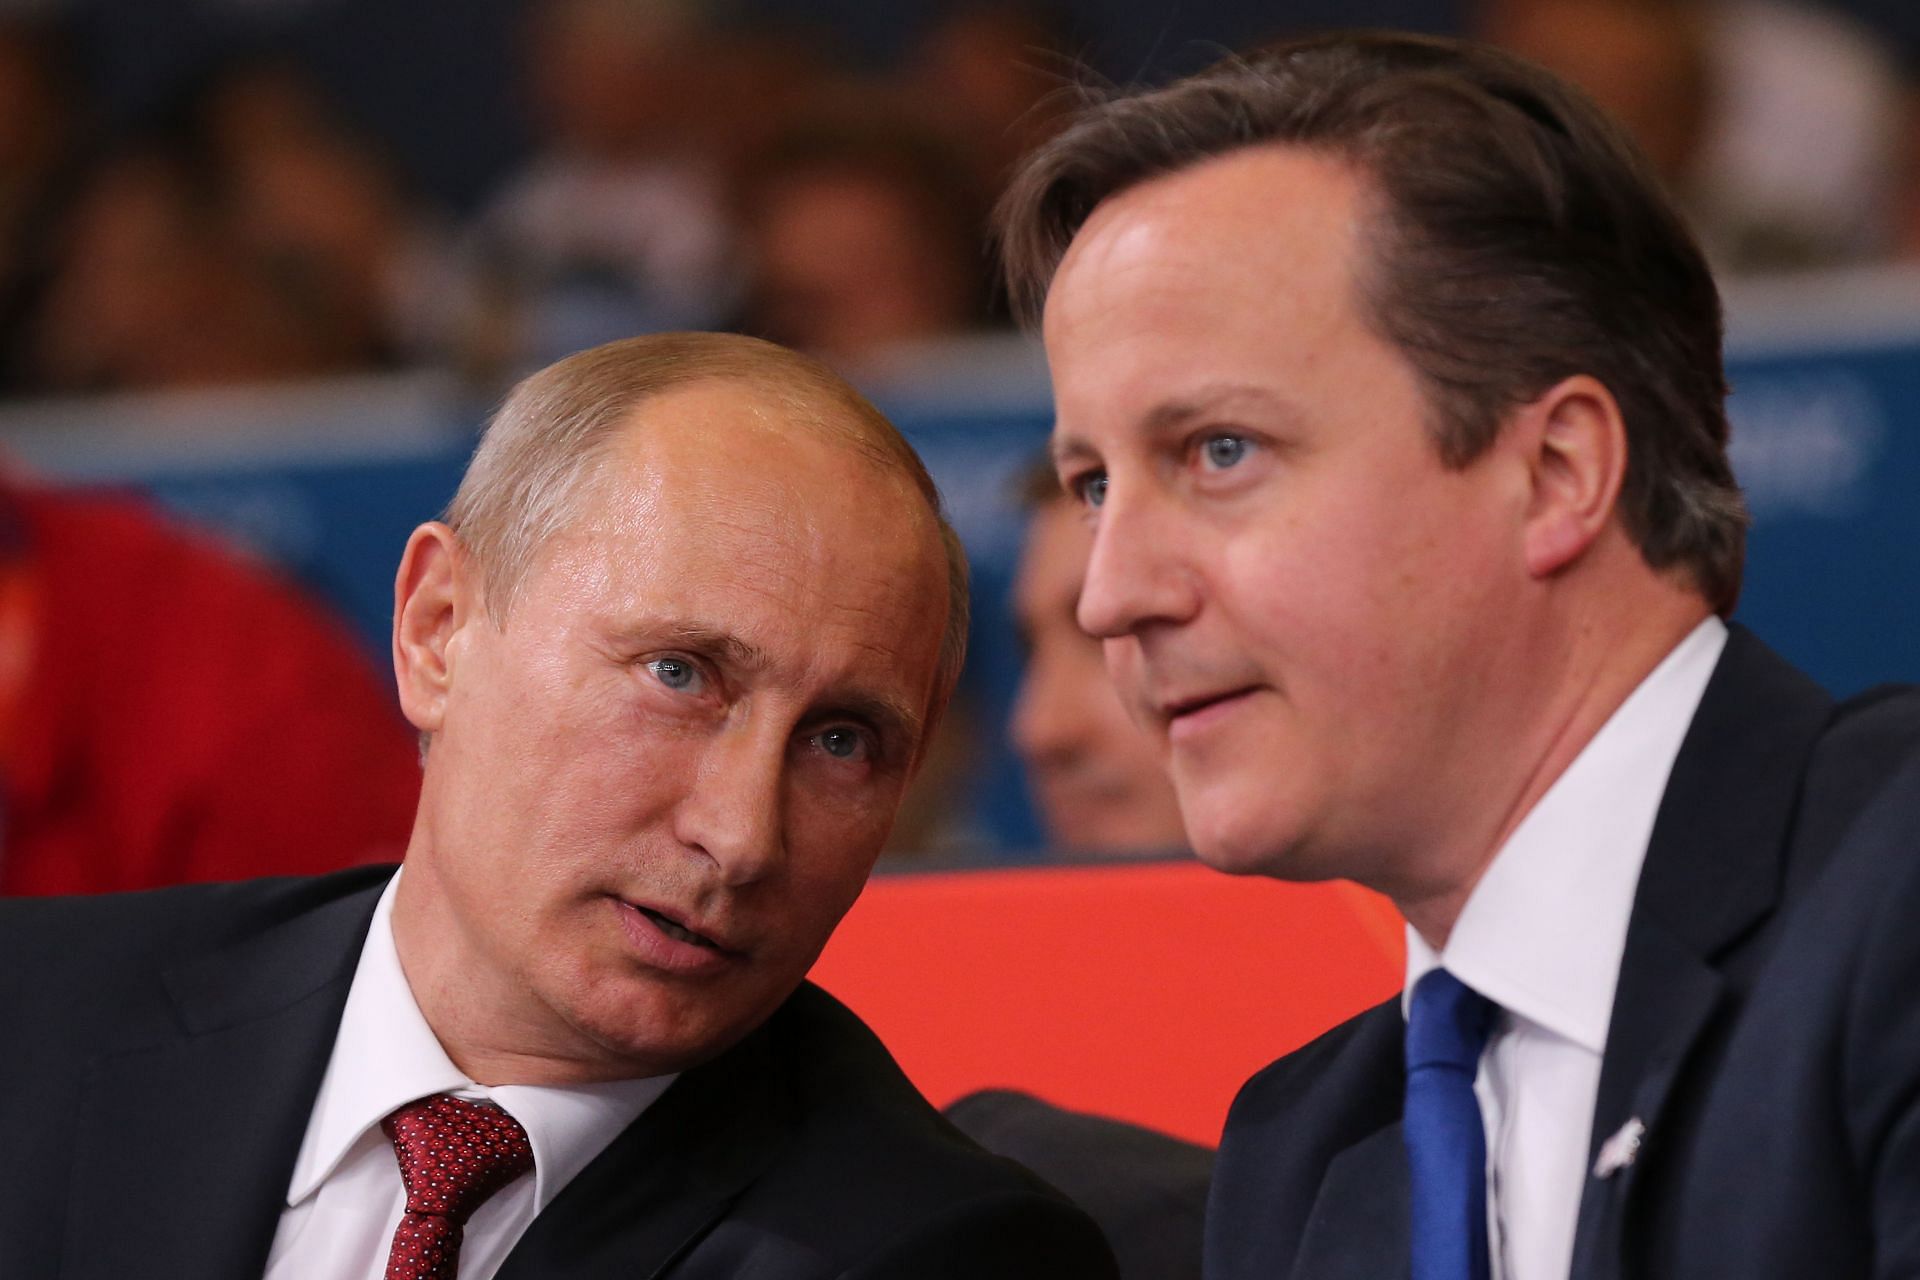 Russian President Vladimir Putin (L) at the judo competition with former British PM David Cameron at 2012 London Olympics (Getty Images)